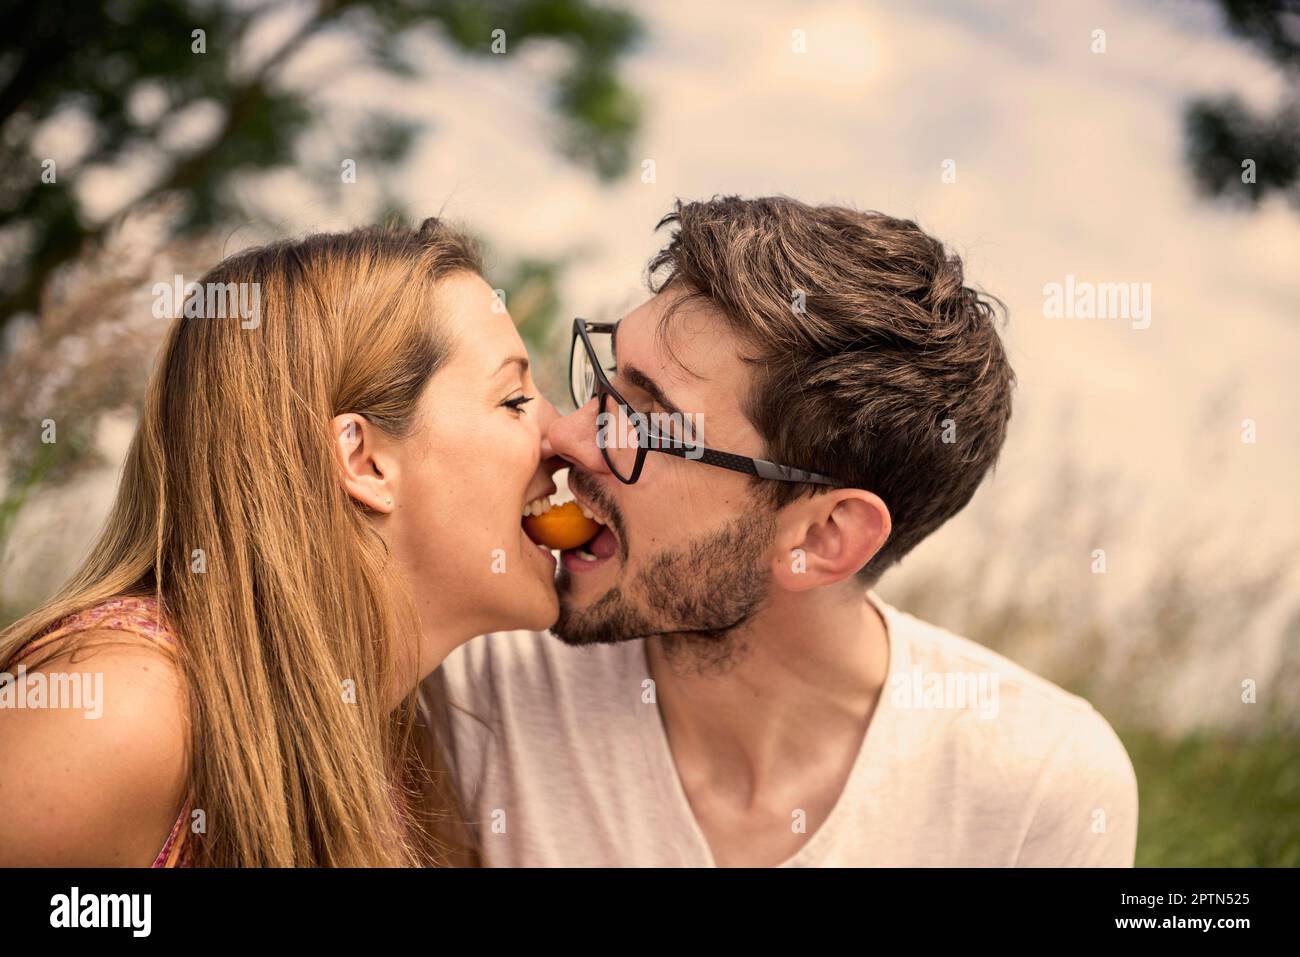 Mid adult couple biting peach together in the countryside, Bavaria, Germany Stock Photo